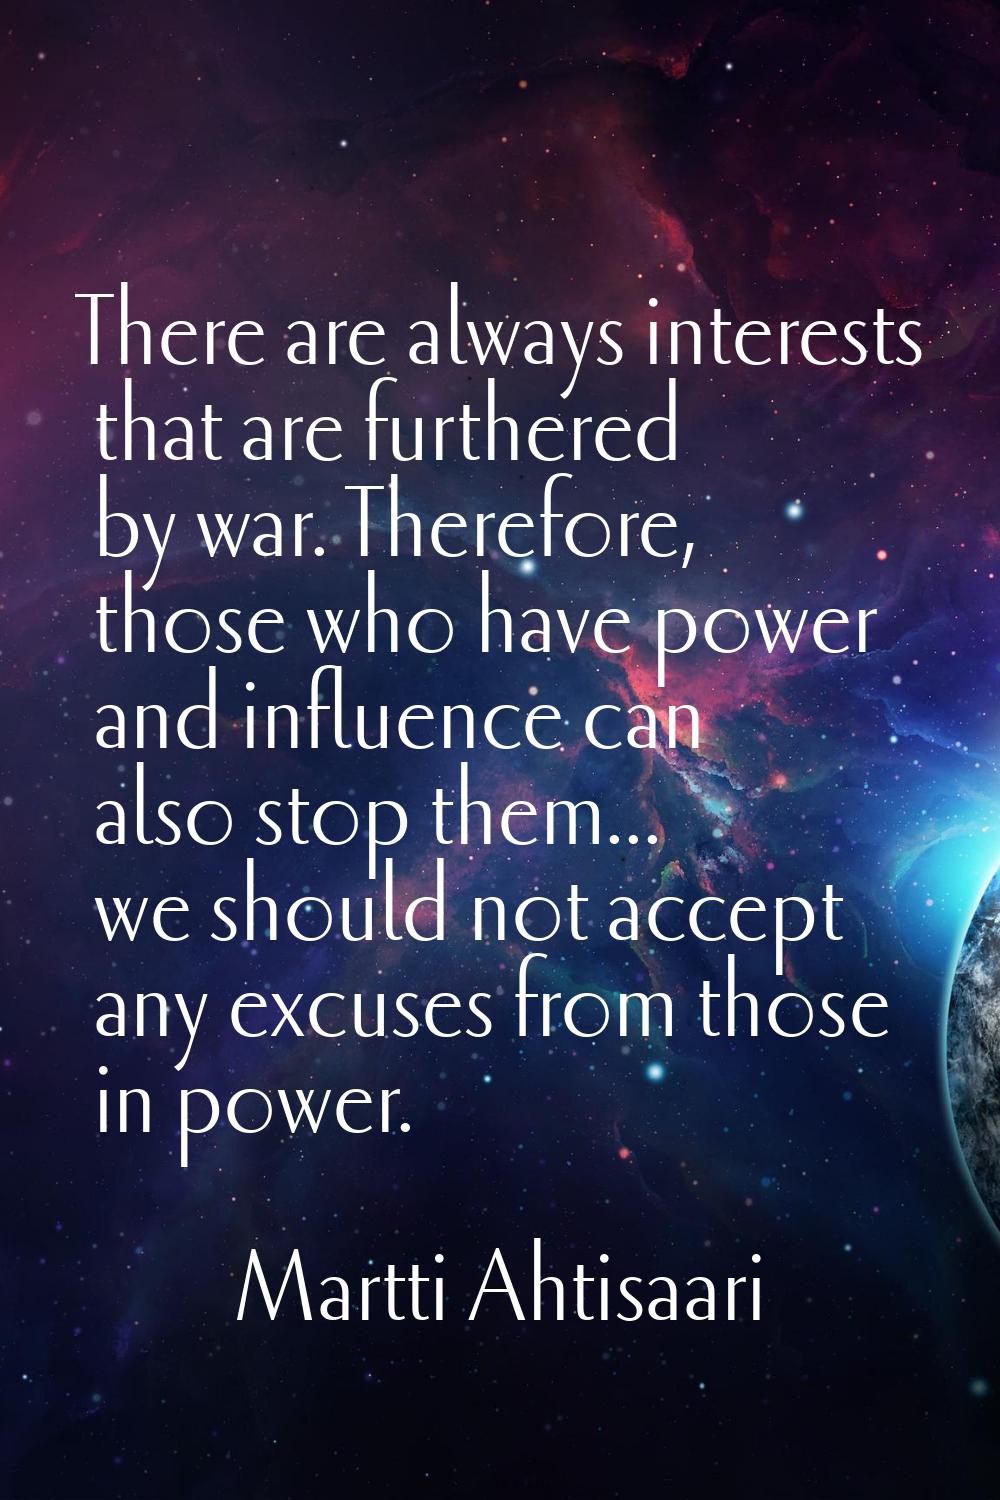 There are always interests that are furthered by war. Therefore, those who have power and influence